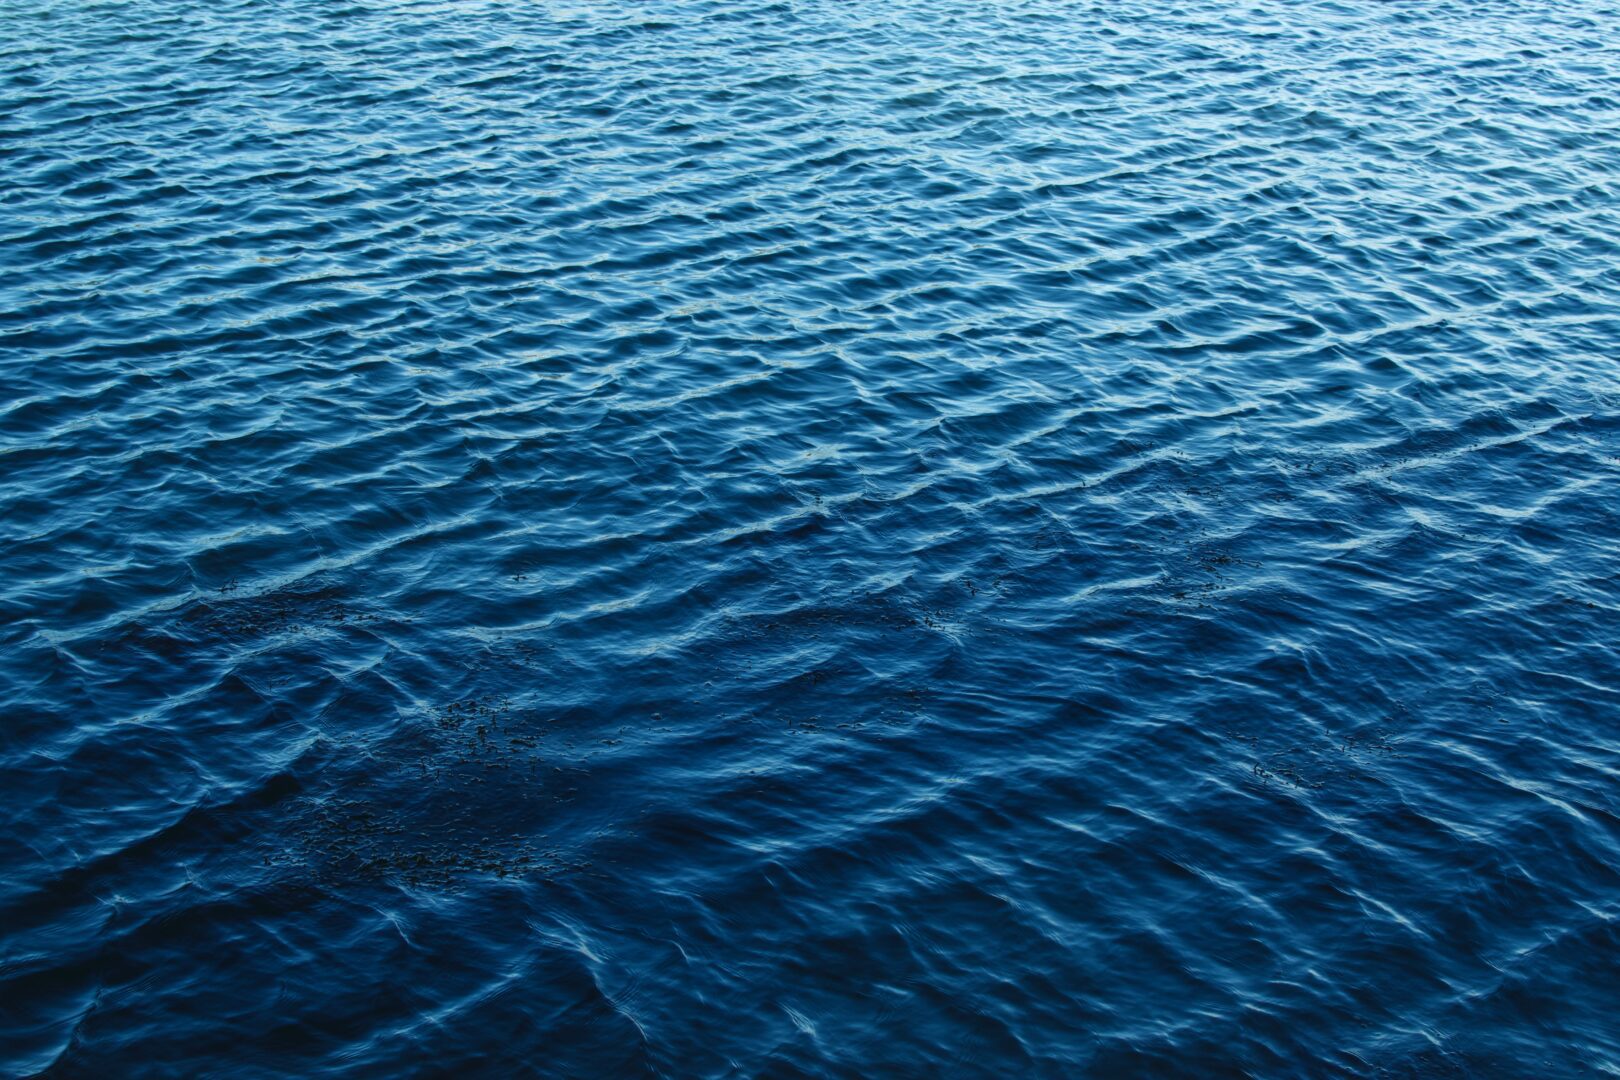 A body of water with blue water and ripples.